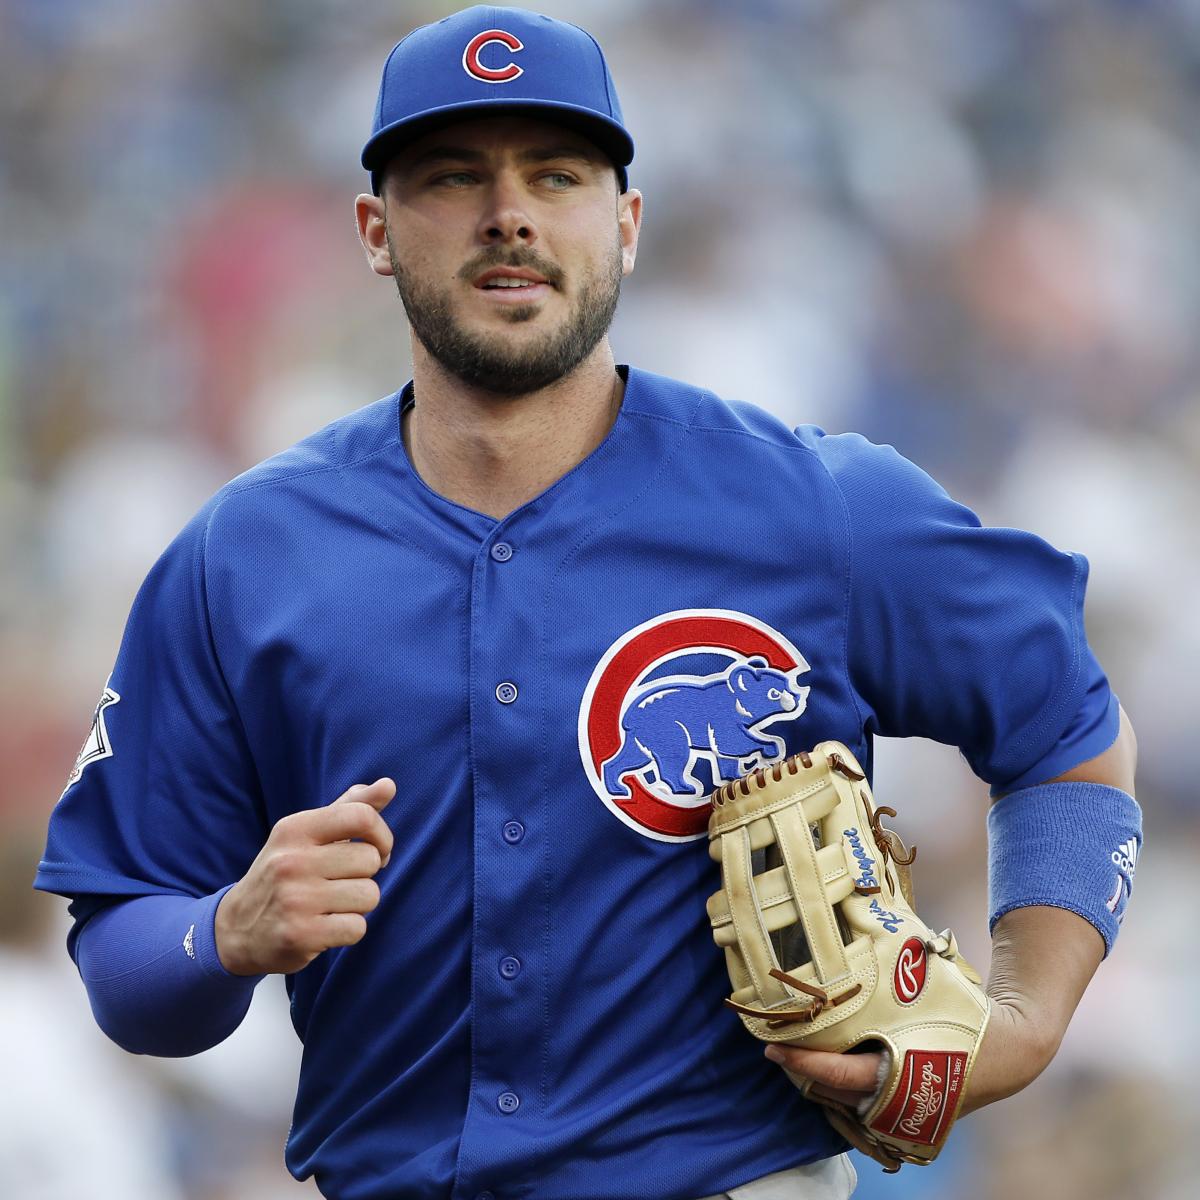 Kris Bryant Got Married: The Bachelor Market In Chicago Lost Some Sparkles  - Bleed Cubbie Blue